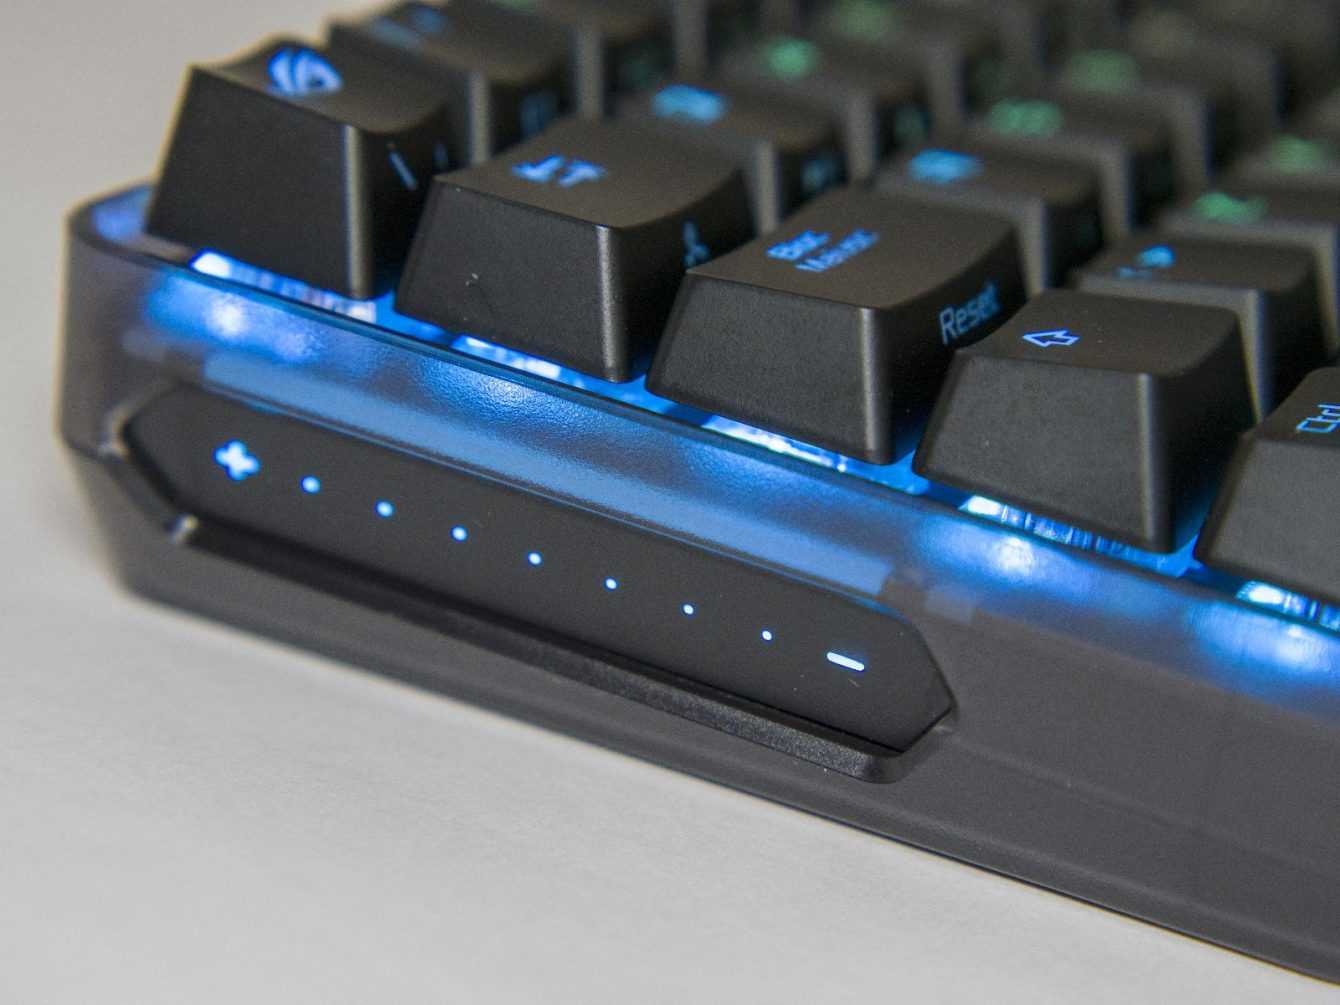 Asus ROG Falchion Ace review: compact and precise